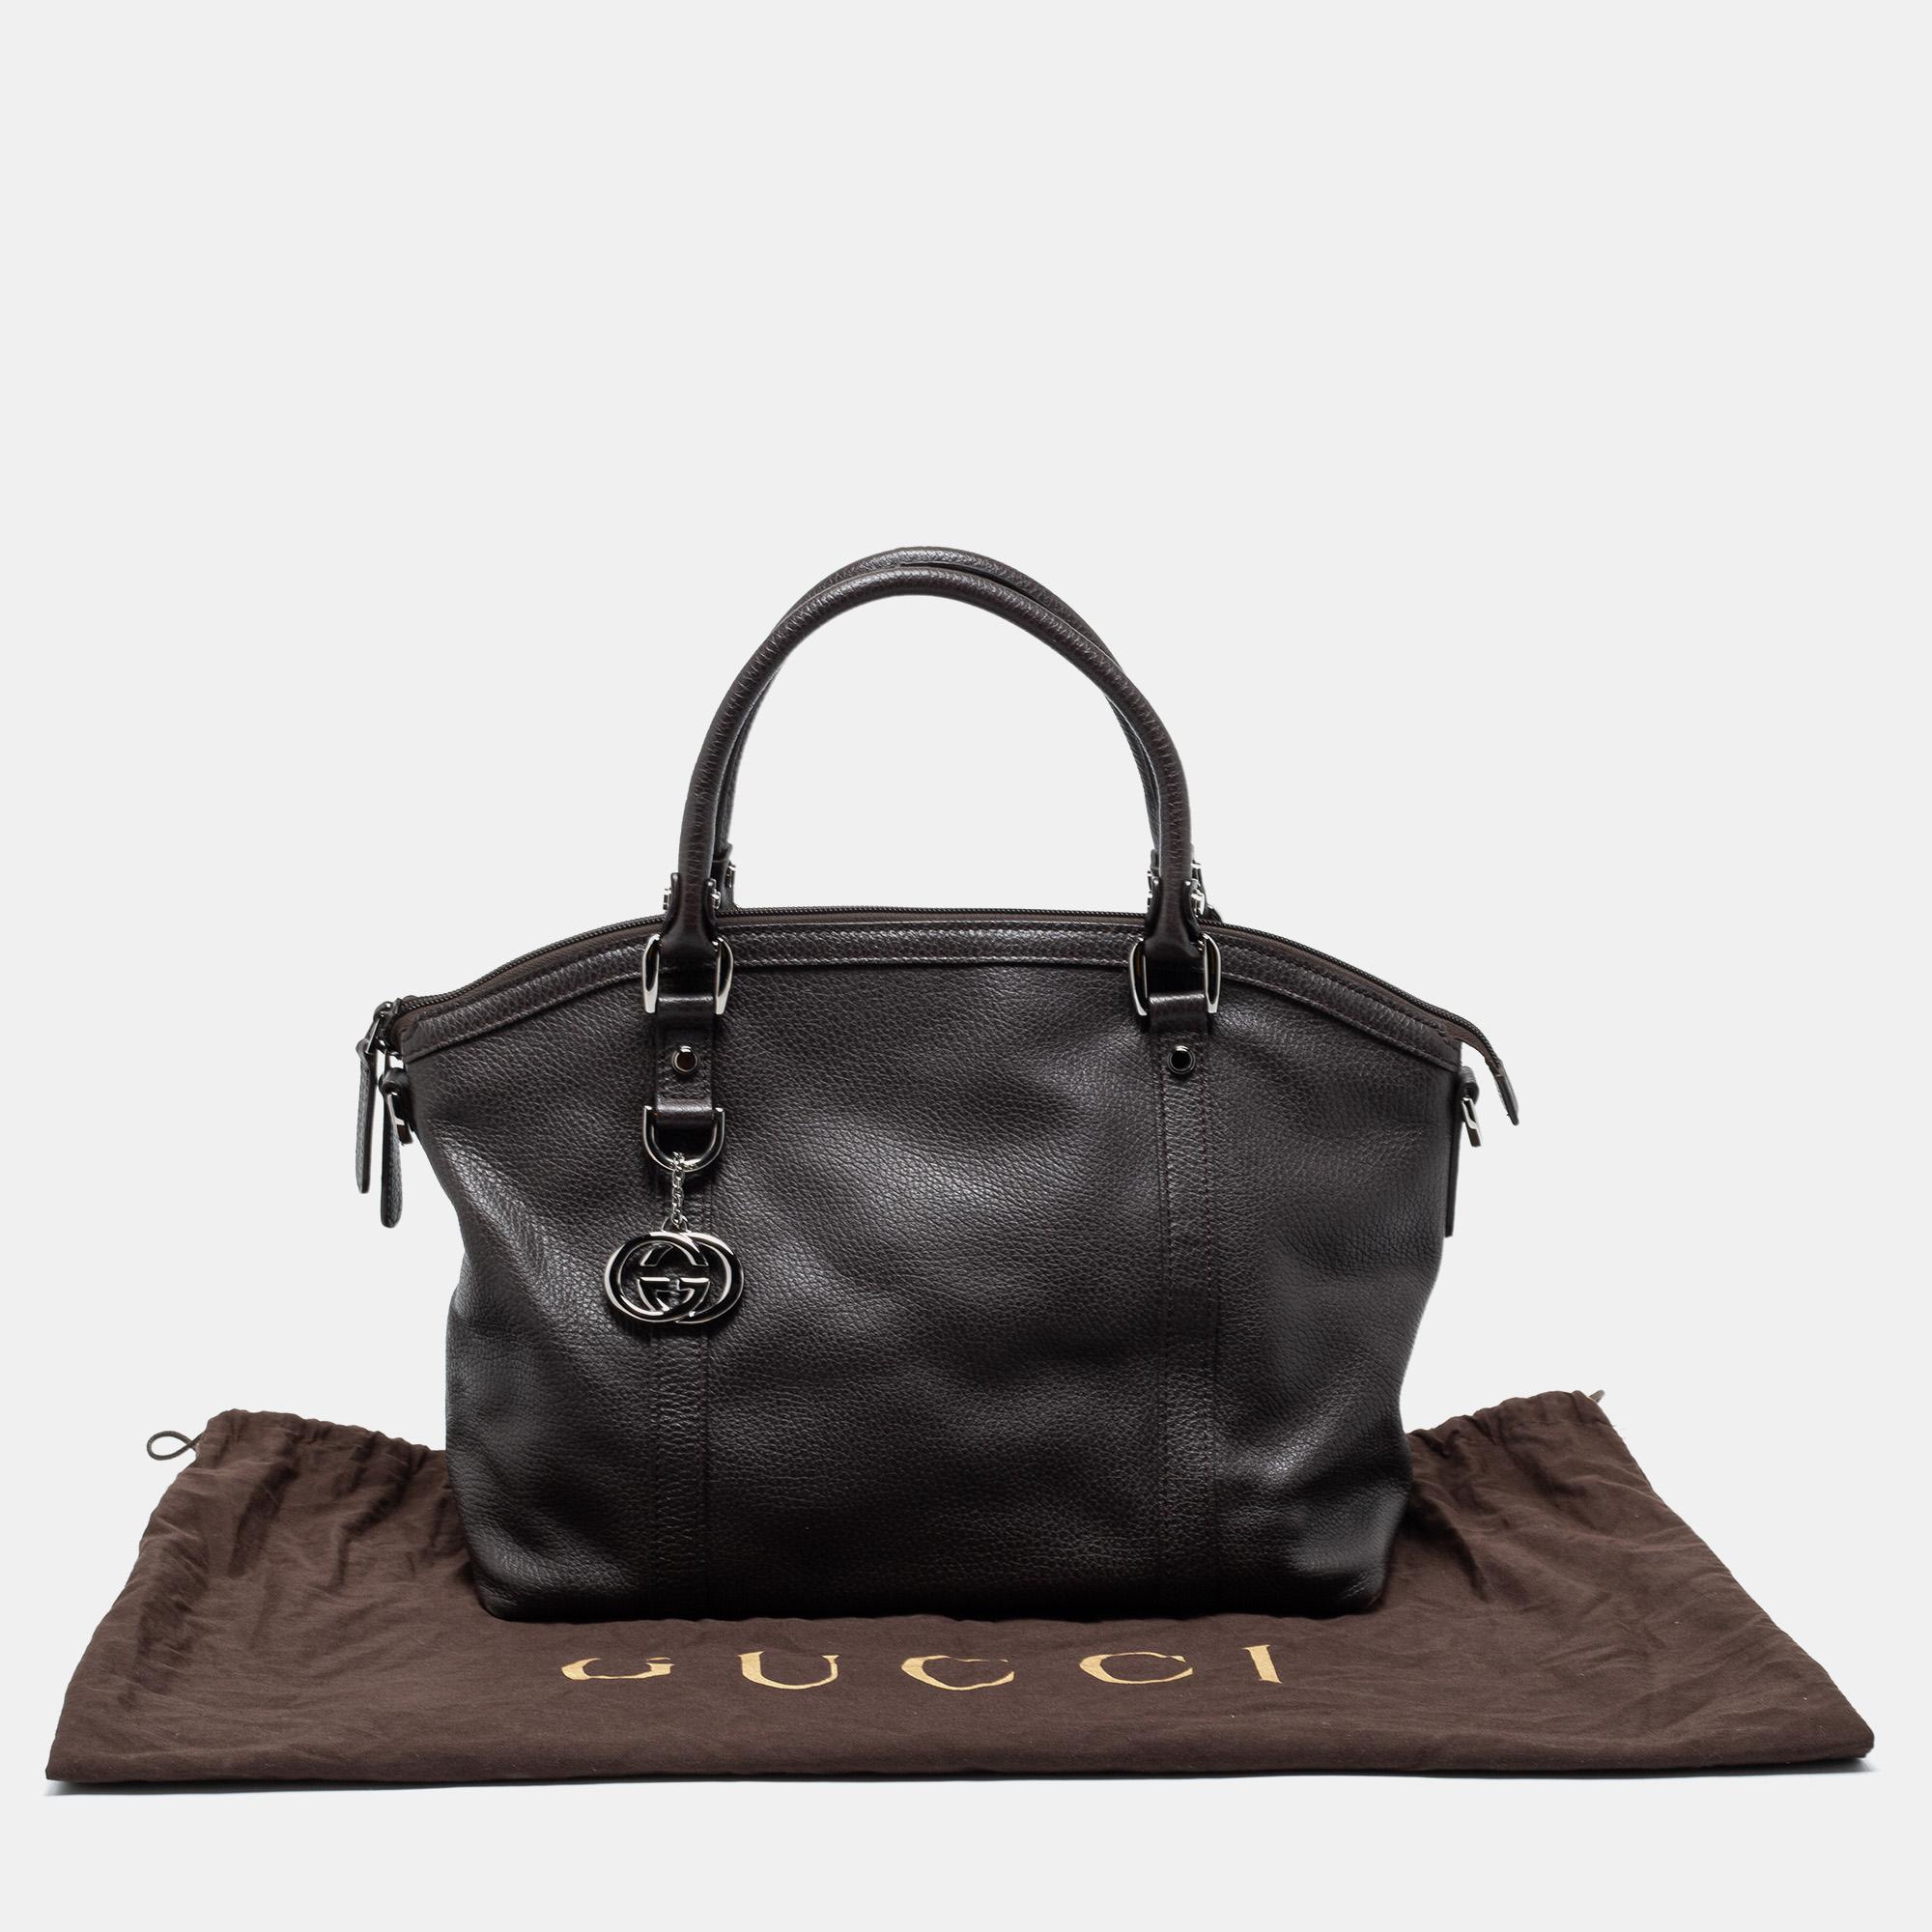 Gucci Dark Brown Leather GG Charm Dome Satchel 9